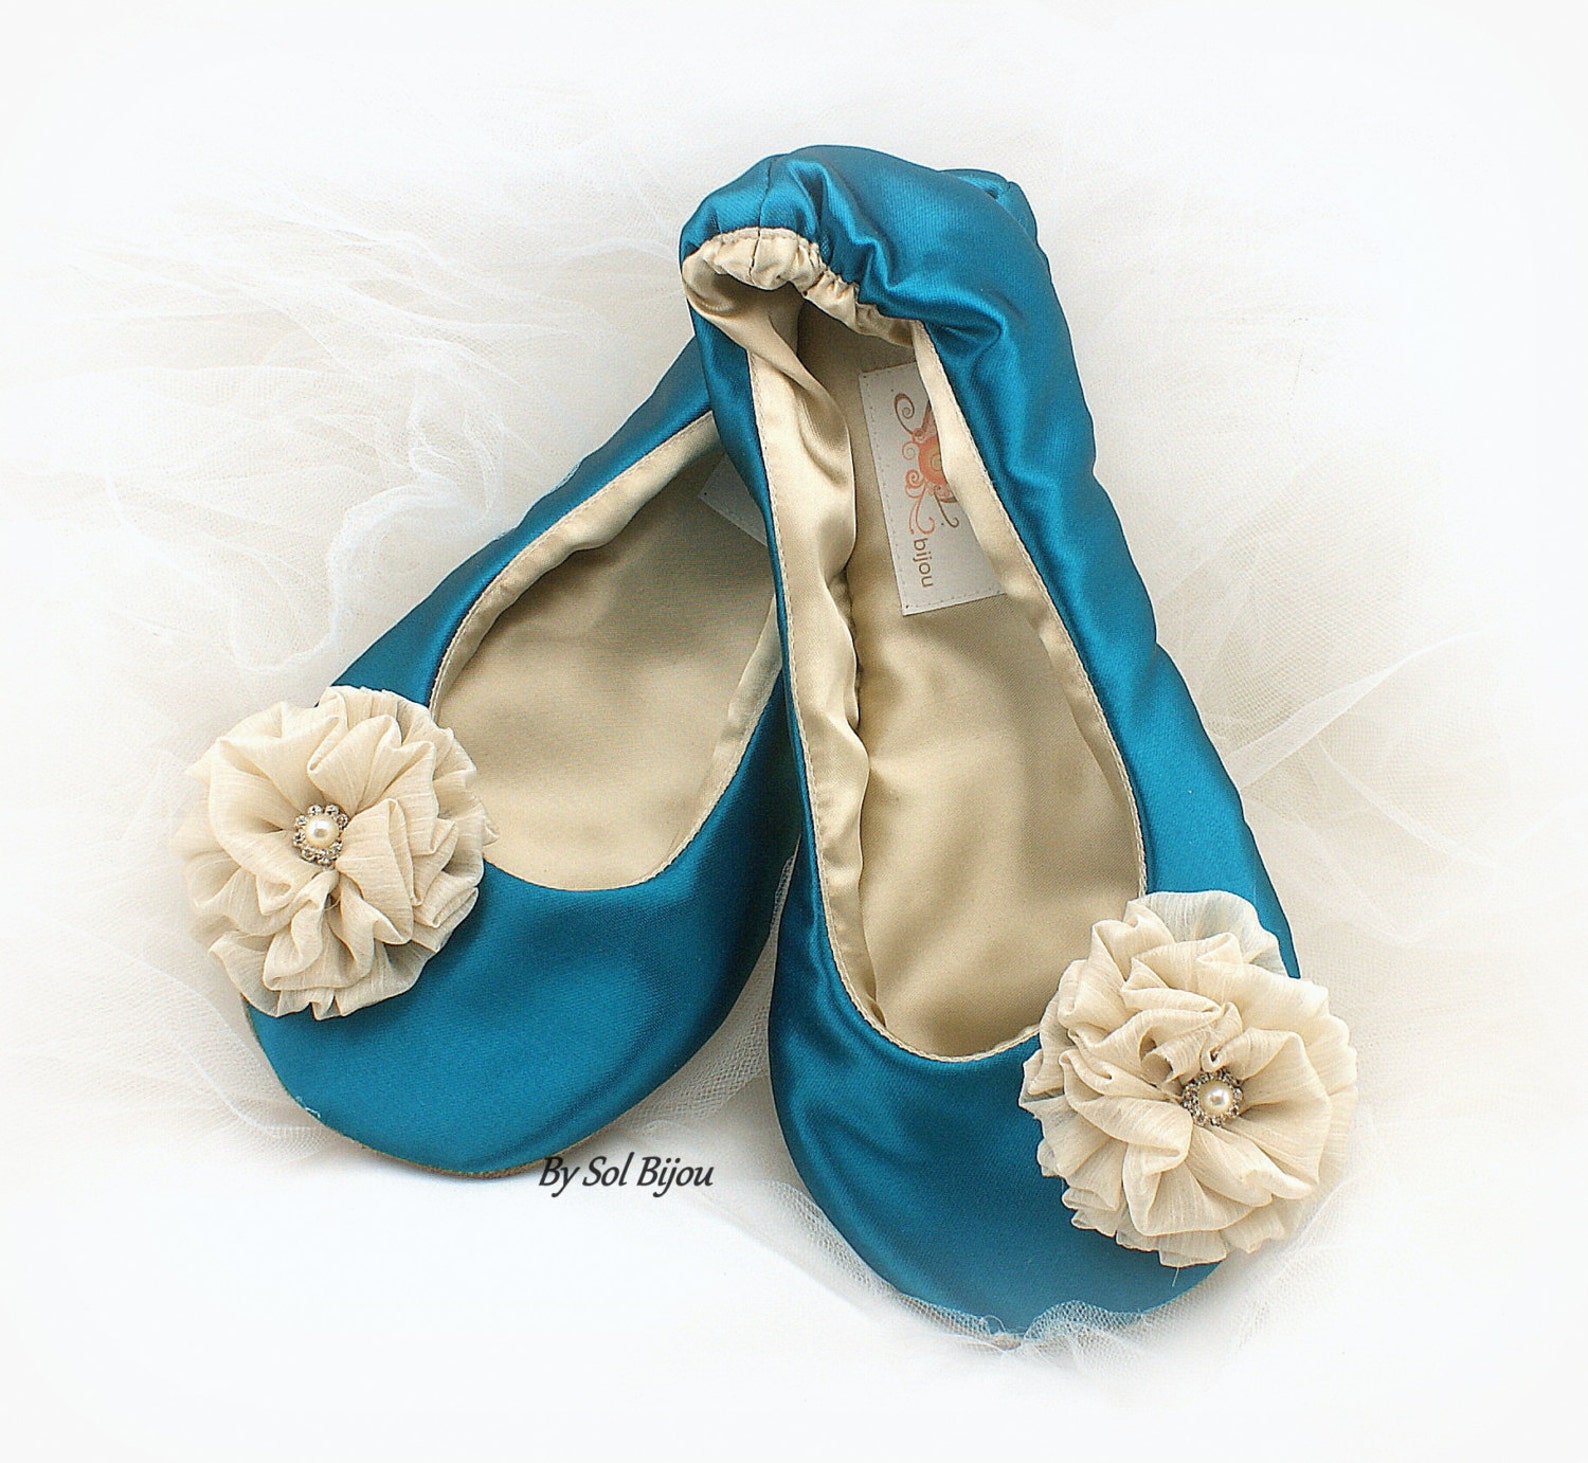 turquoise ballet shoes